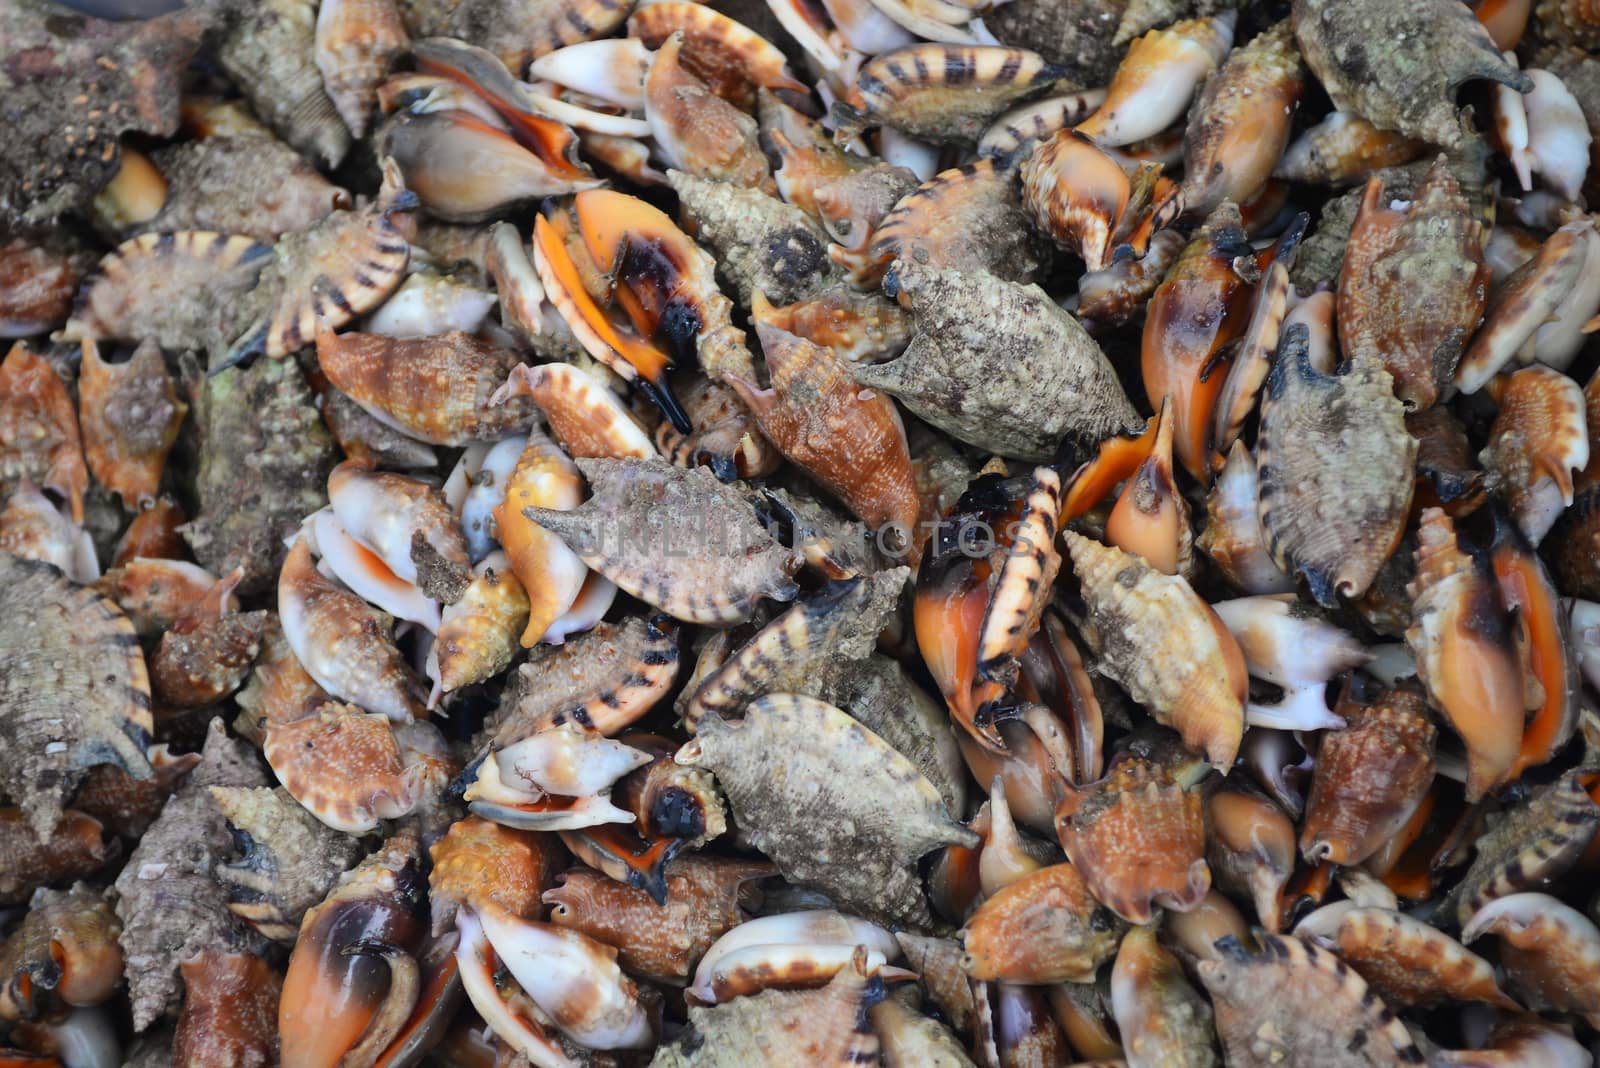 Group of Conch Sell in fresh seafood market by ideation90